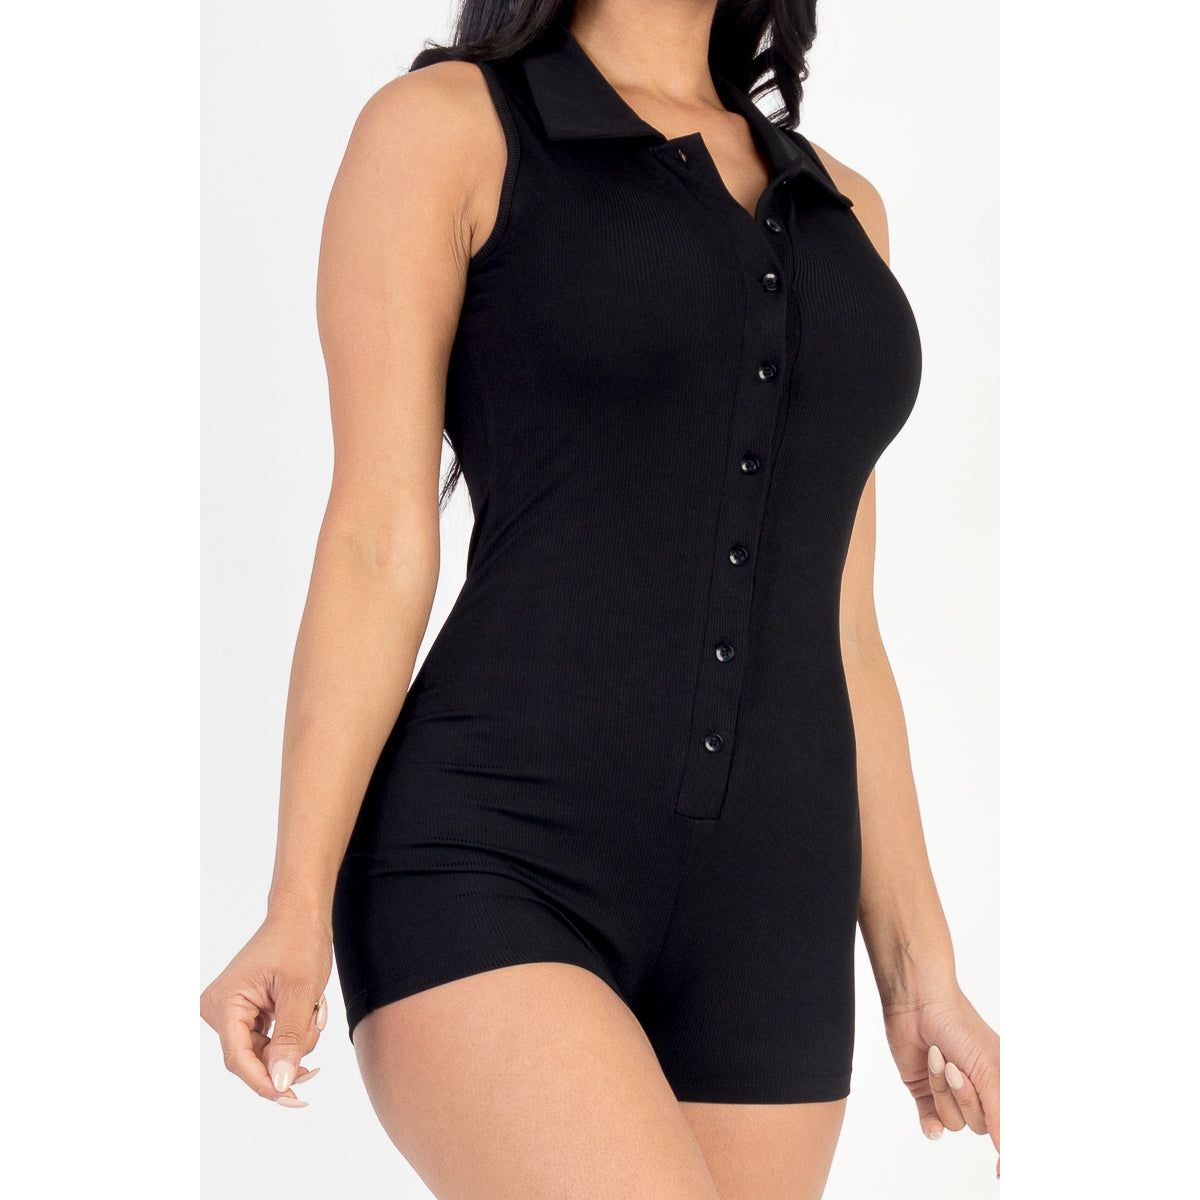 Effortless Elegance: Ribbed Knit Button Front Romper by Capella - KME means the very best